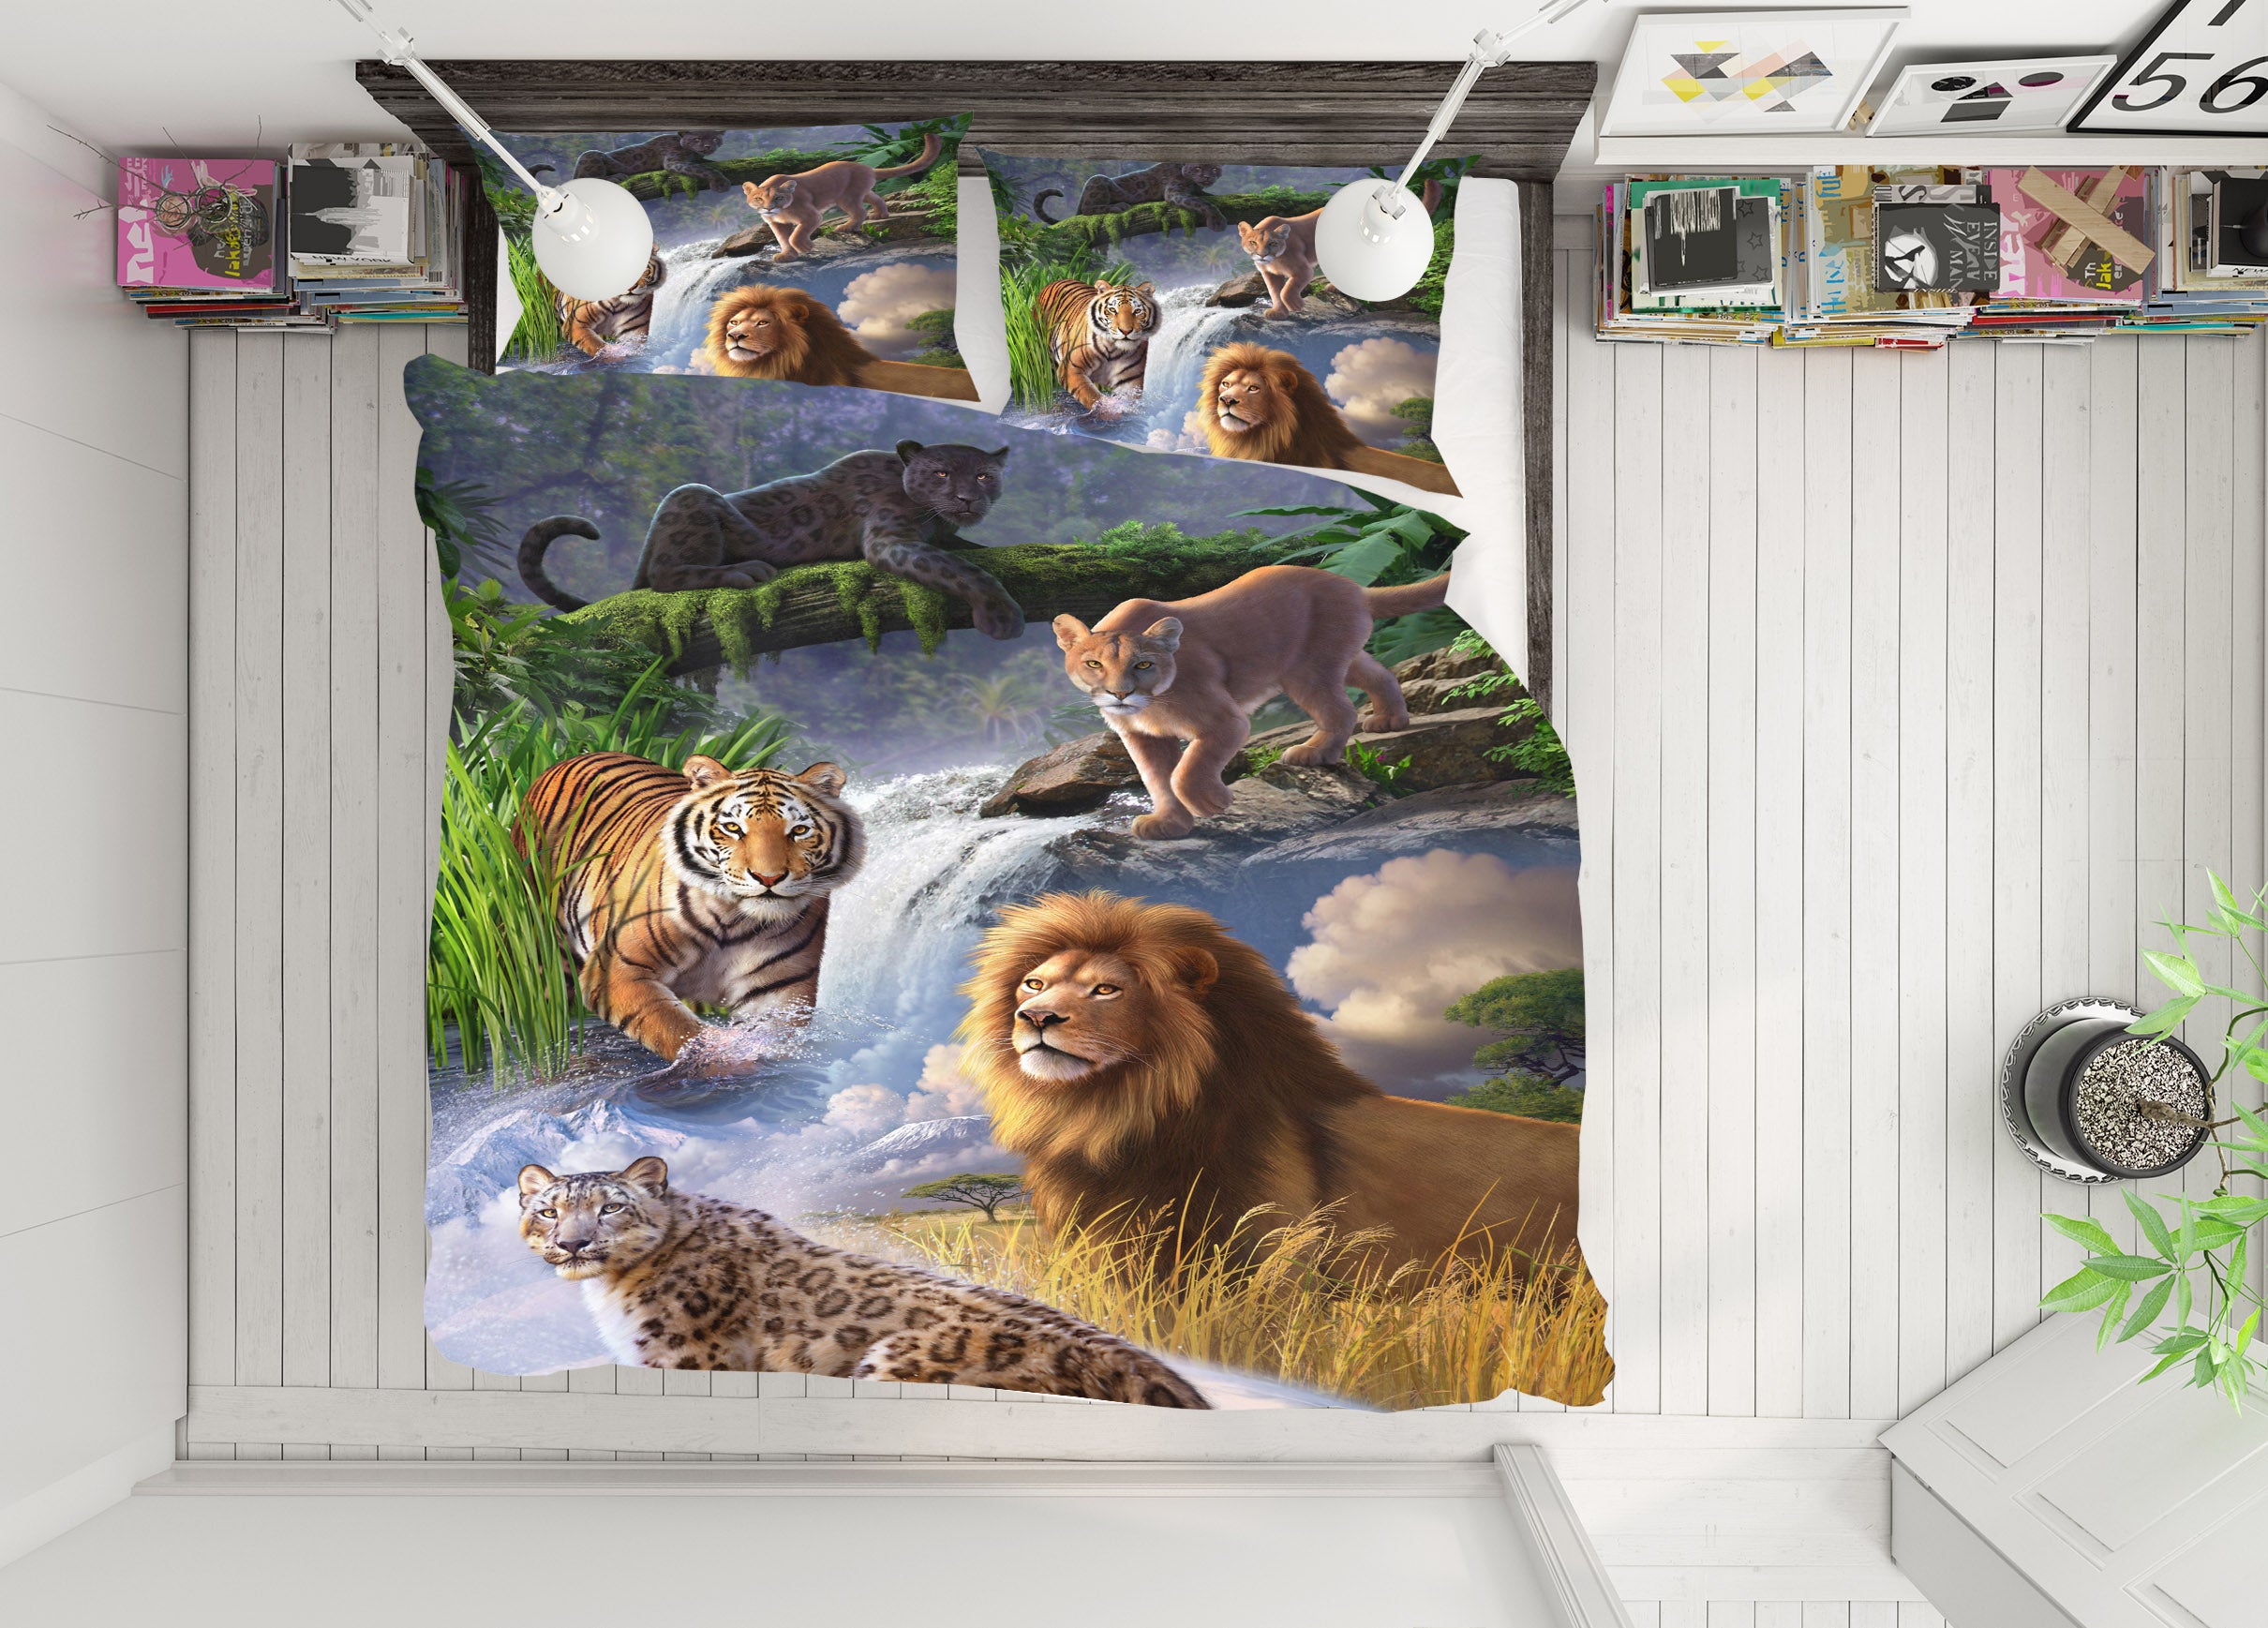 3D Tiger Lion 86021 Jerry LoFaro bedding Bed Pillowcases Quilt